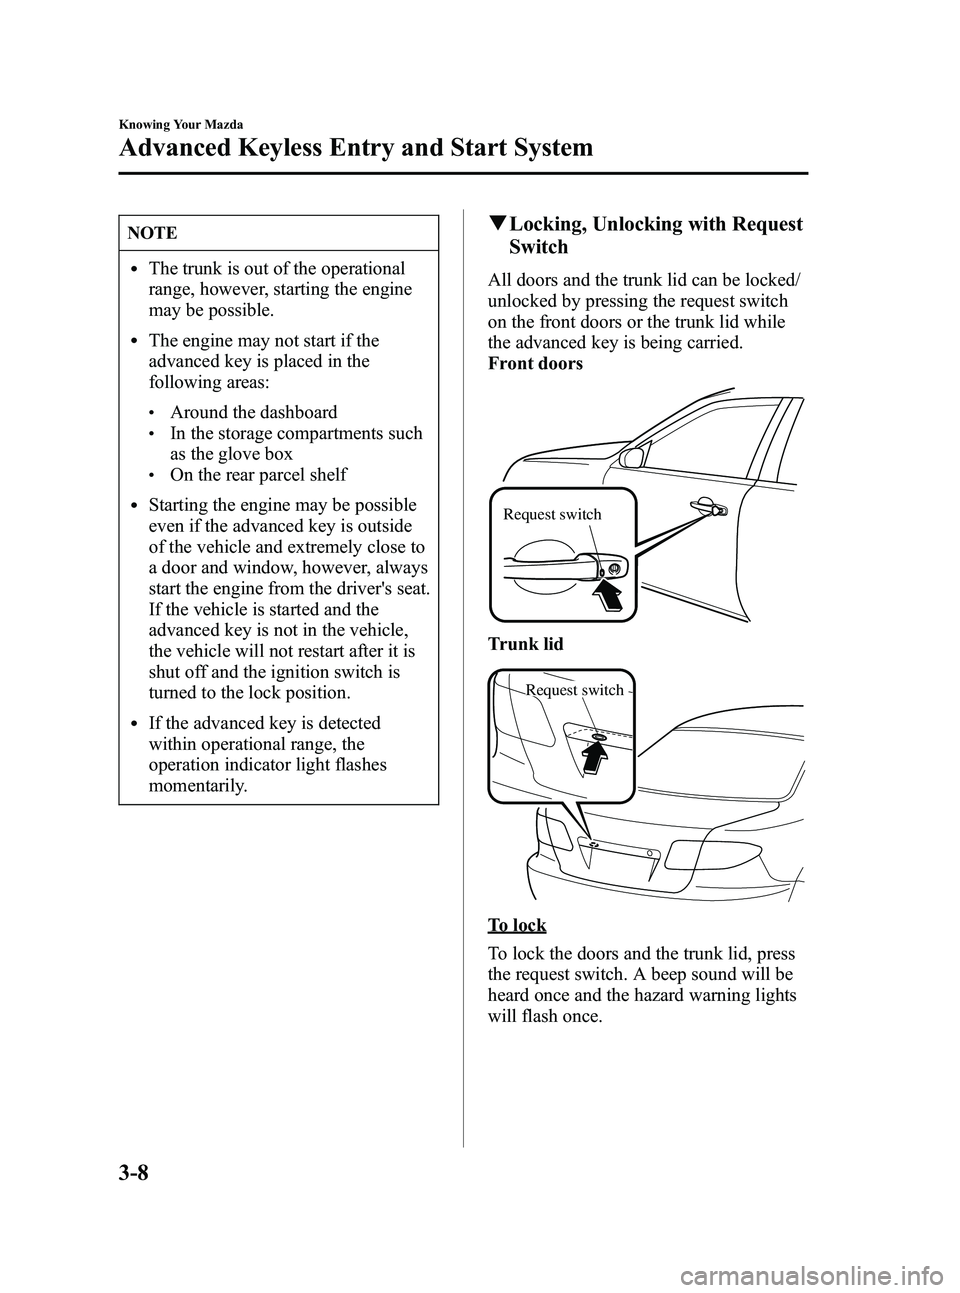 MAZDA MODEL SPEED 6 2006  Owners Manual Black plate (76,1)
NOTE
lThe trunk is out of the operational
range, however, starting the engine
may be possible.
lThe engine may not start if the
advanced key is placed in the
following areas:
lAroun